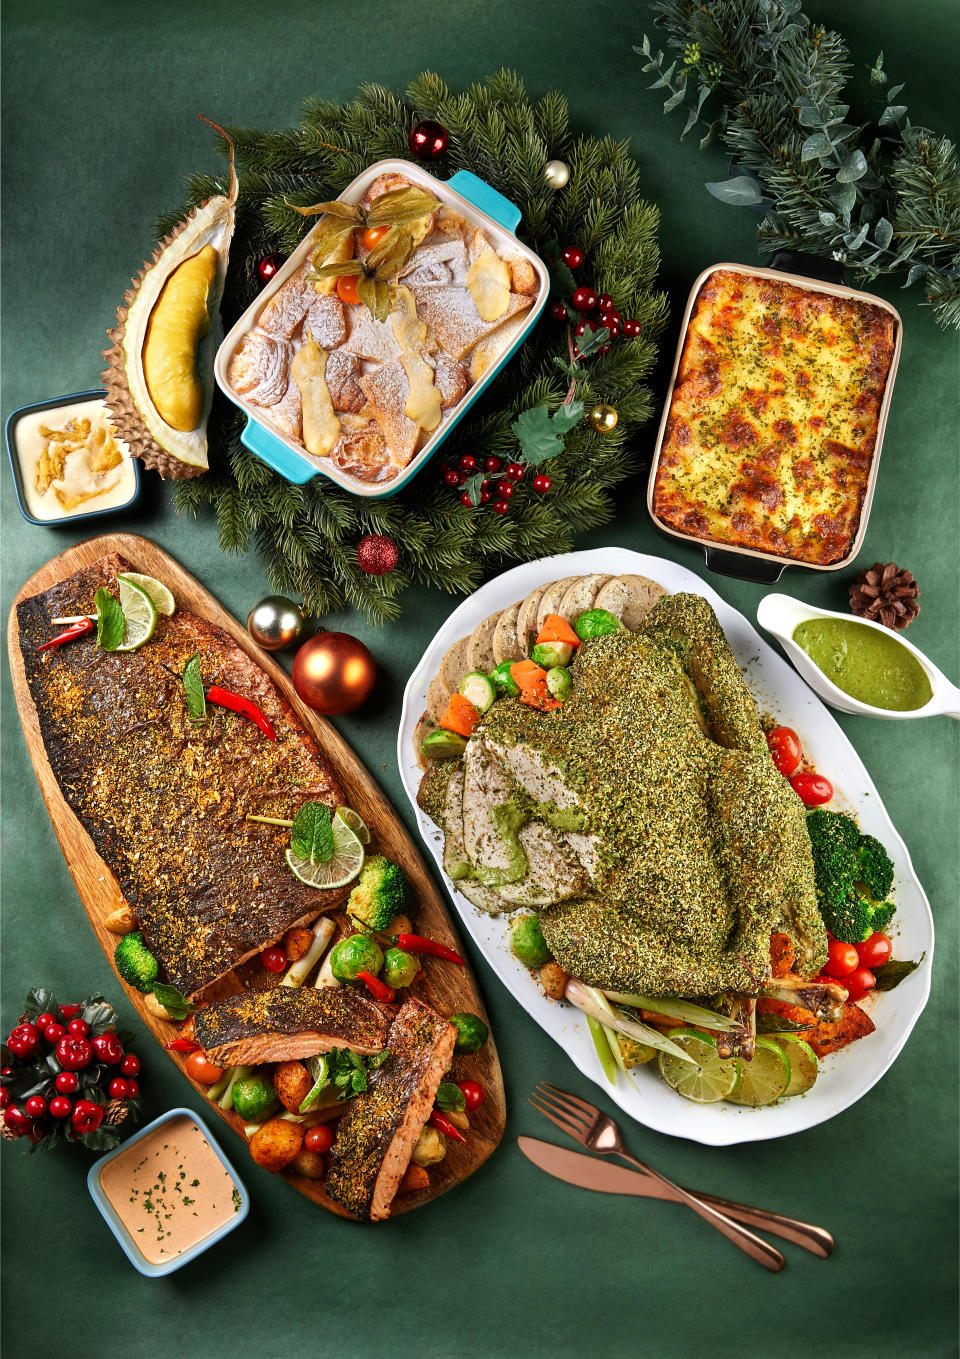 Christmas menu by Stamford Catering. (PHOTO: Stamford Catering)